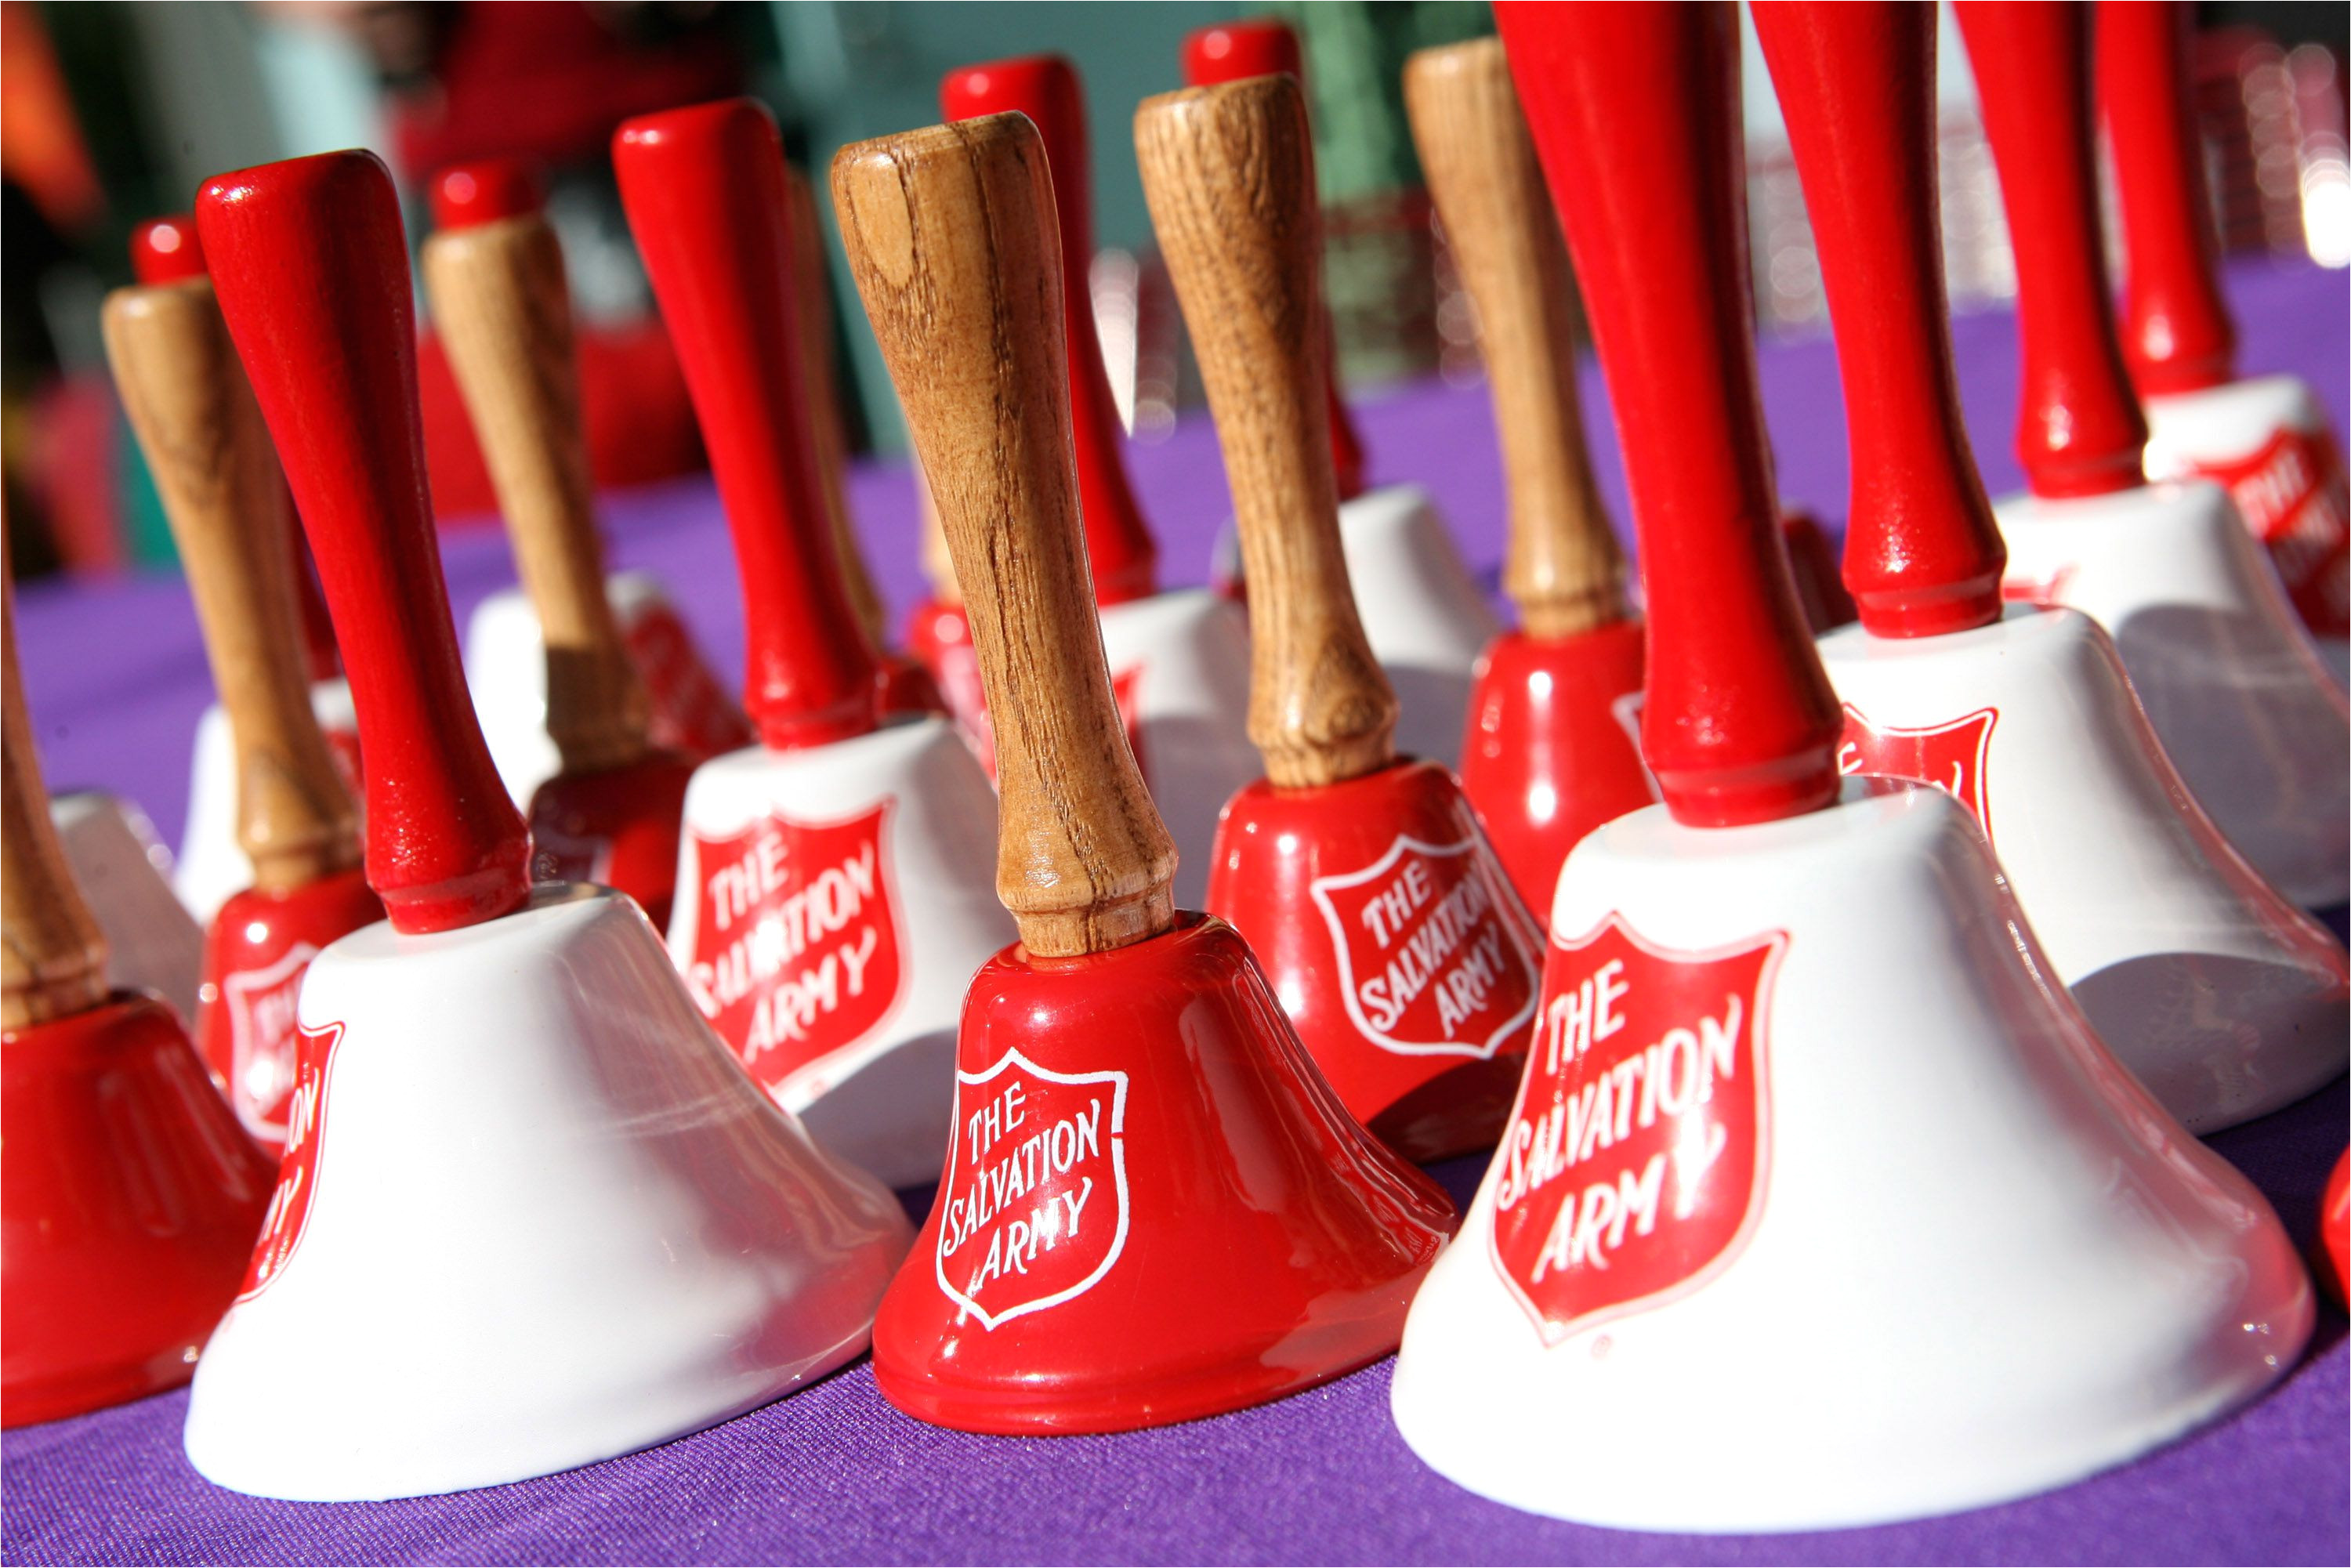 the 20th annual salvation army celebrity rotary bell ring in the holiday season 107118051 5b0eff720e23d90036f8a6fd jpg